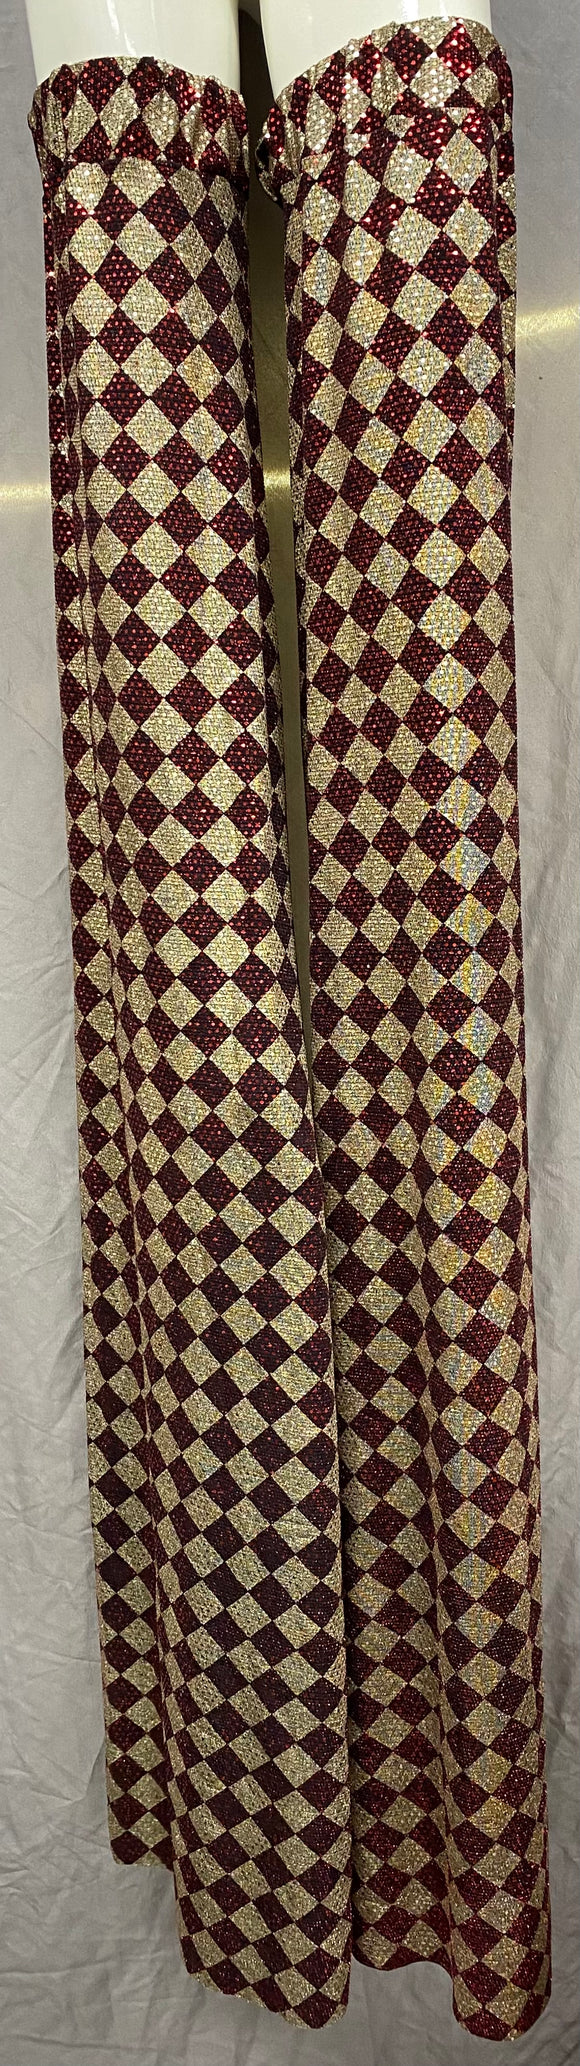 Stilt Covers - Red and Gold Checkers 58